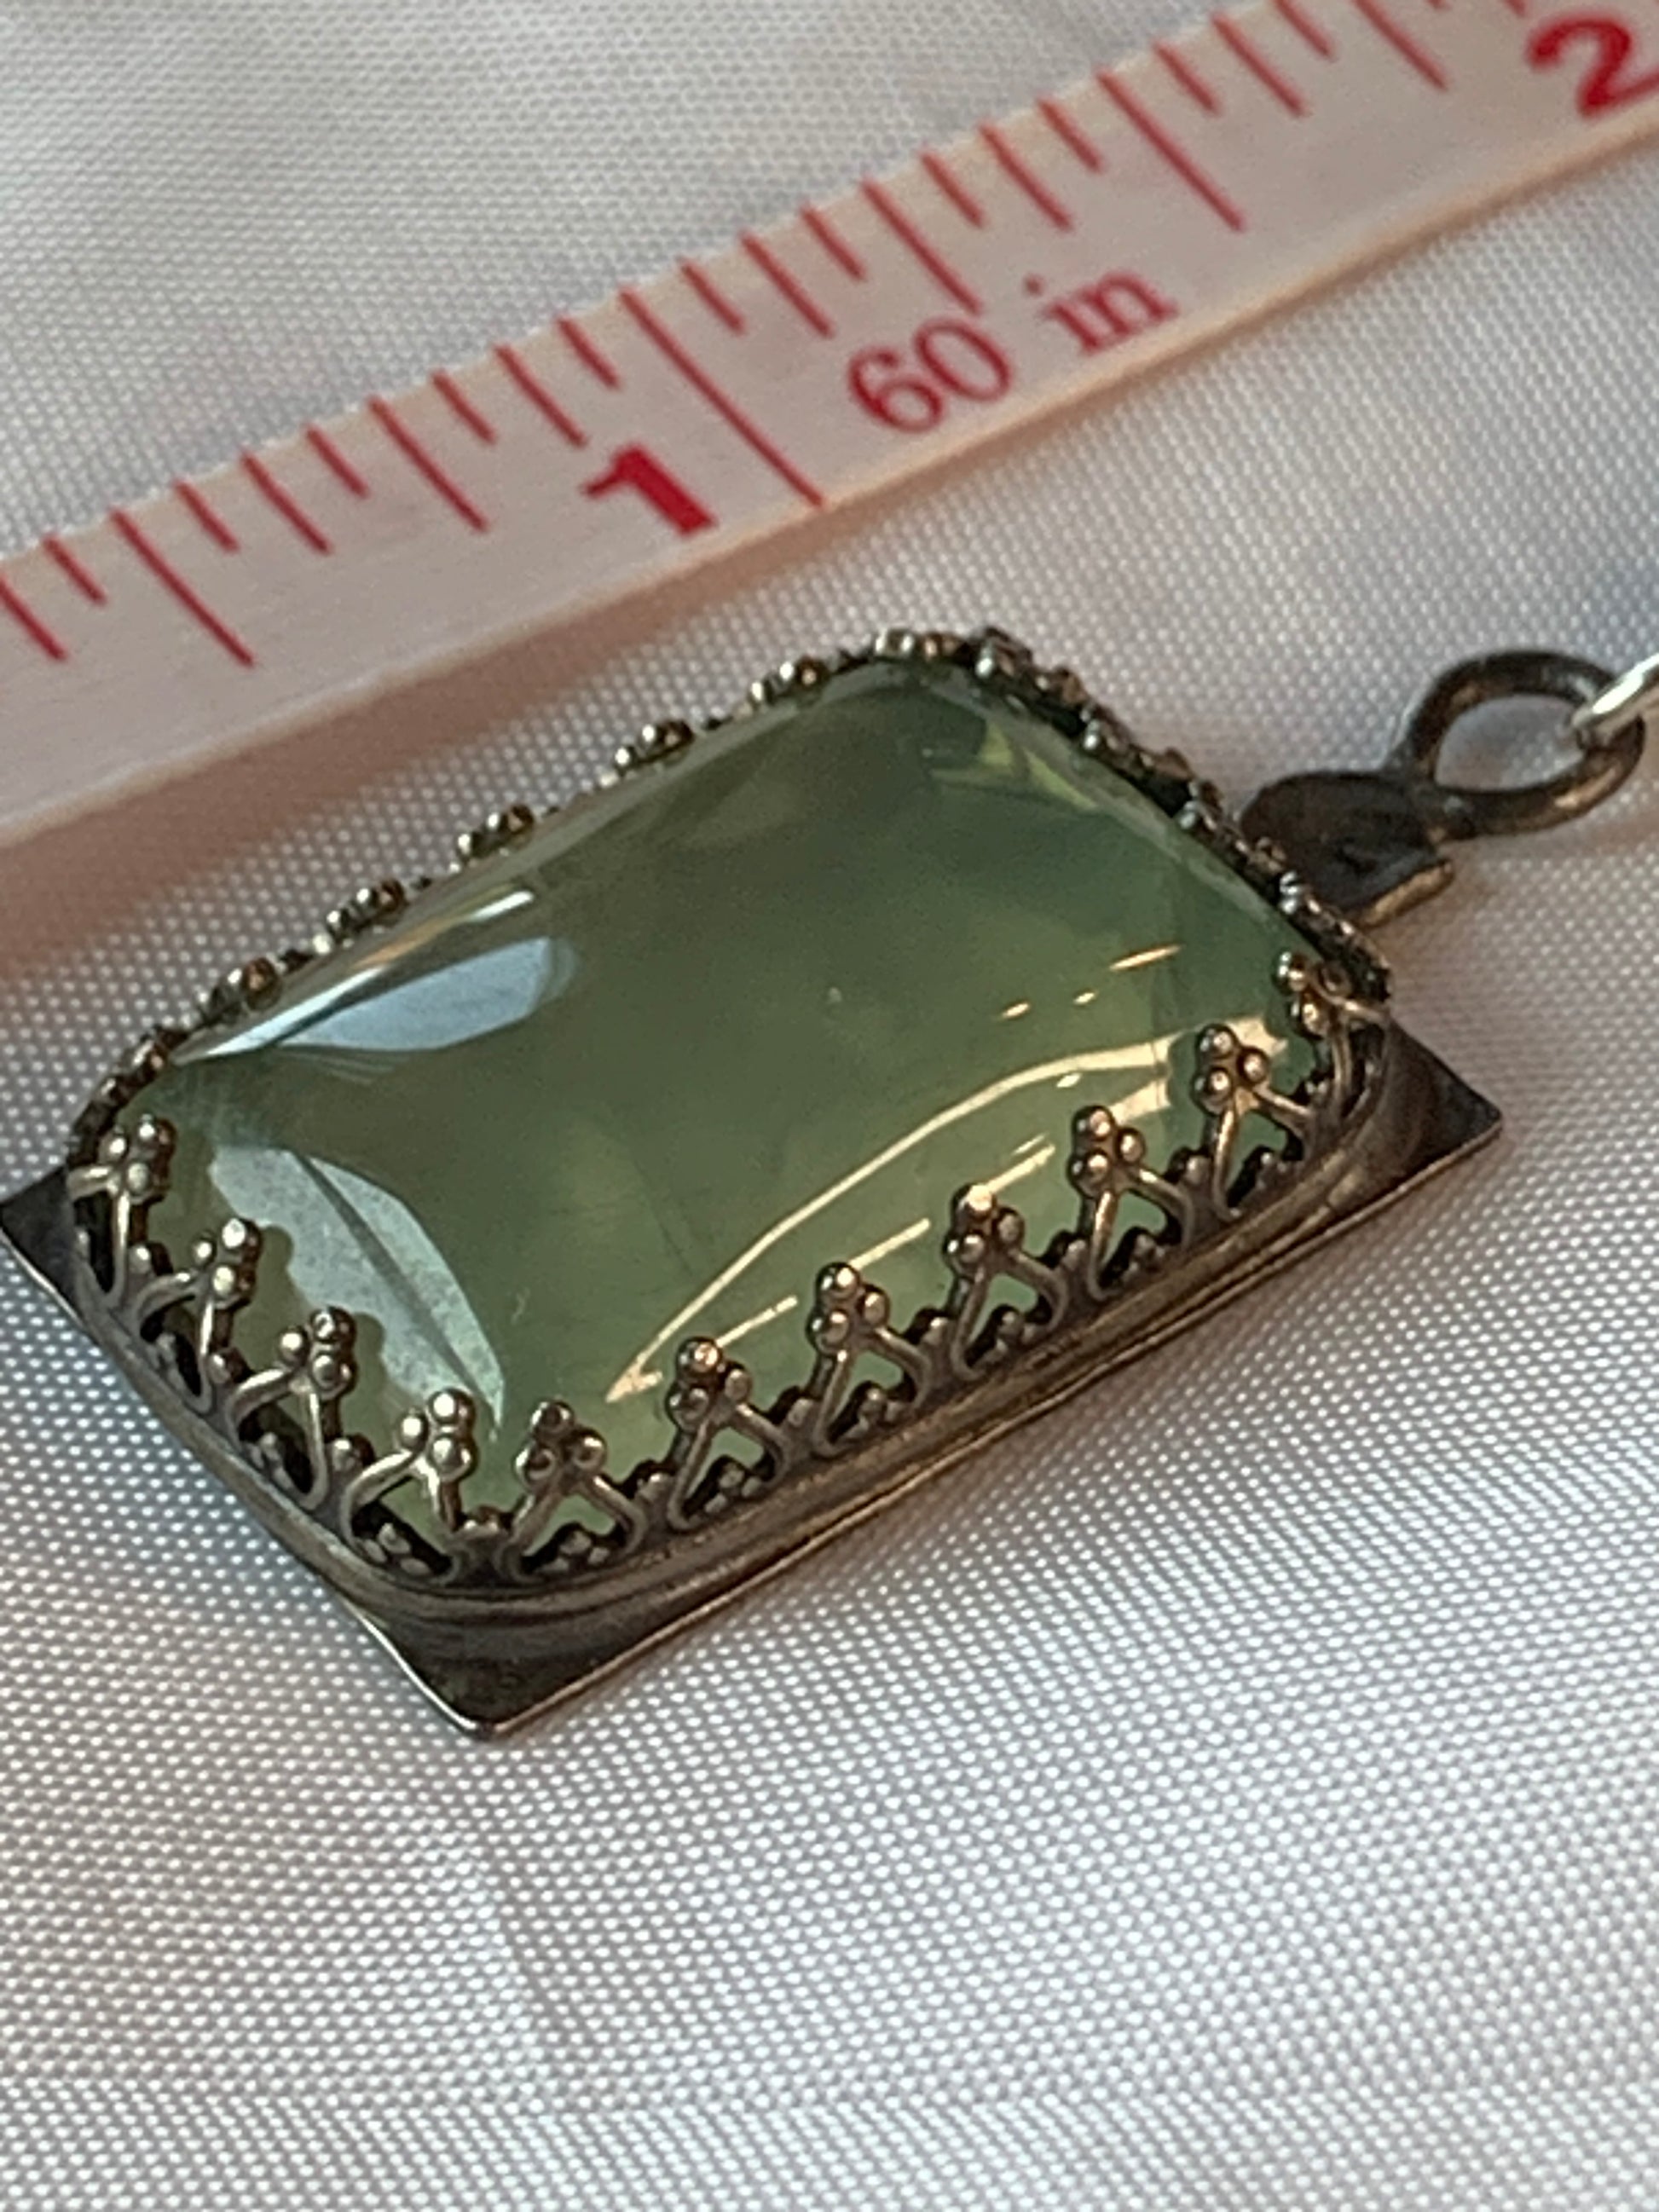 This one-of-a-kind Prehnite pendant is sure to make a statement. Handcrafted from 925 Sterling Silver and a large Prehnite gemstone, this pendant will bring an air of sophistication to any outfit. Enjoy the unique beauty of this piece - no two are exactly alike!